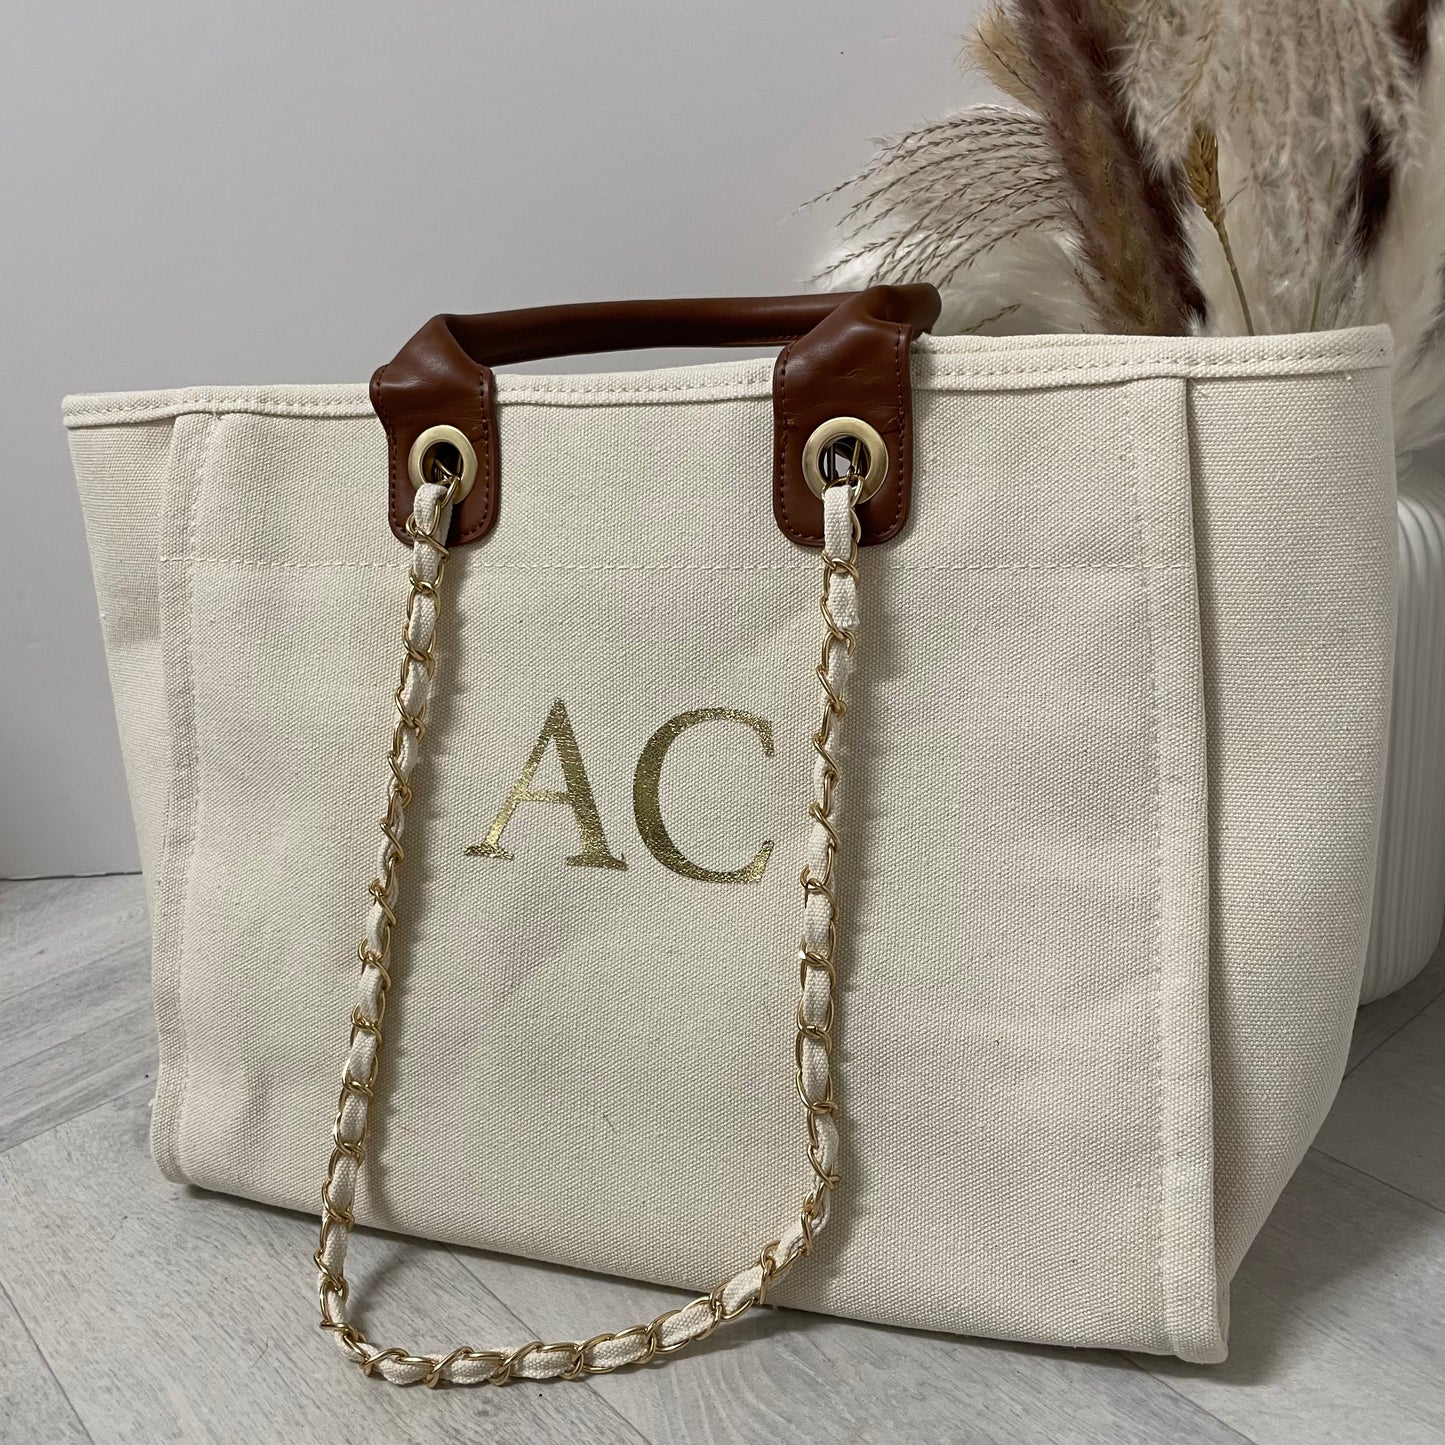 Personalised White & Brown Large Chain Initial Tote Bags